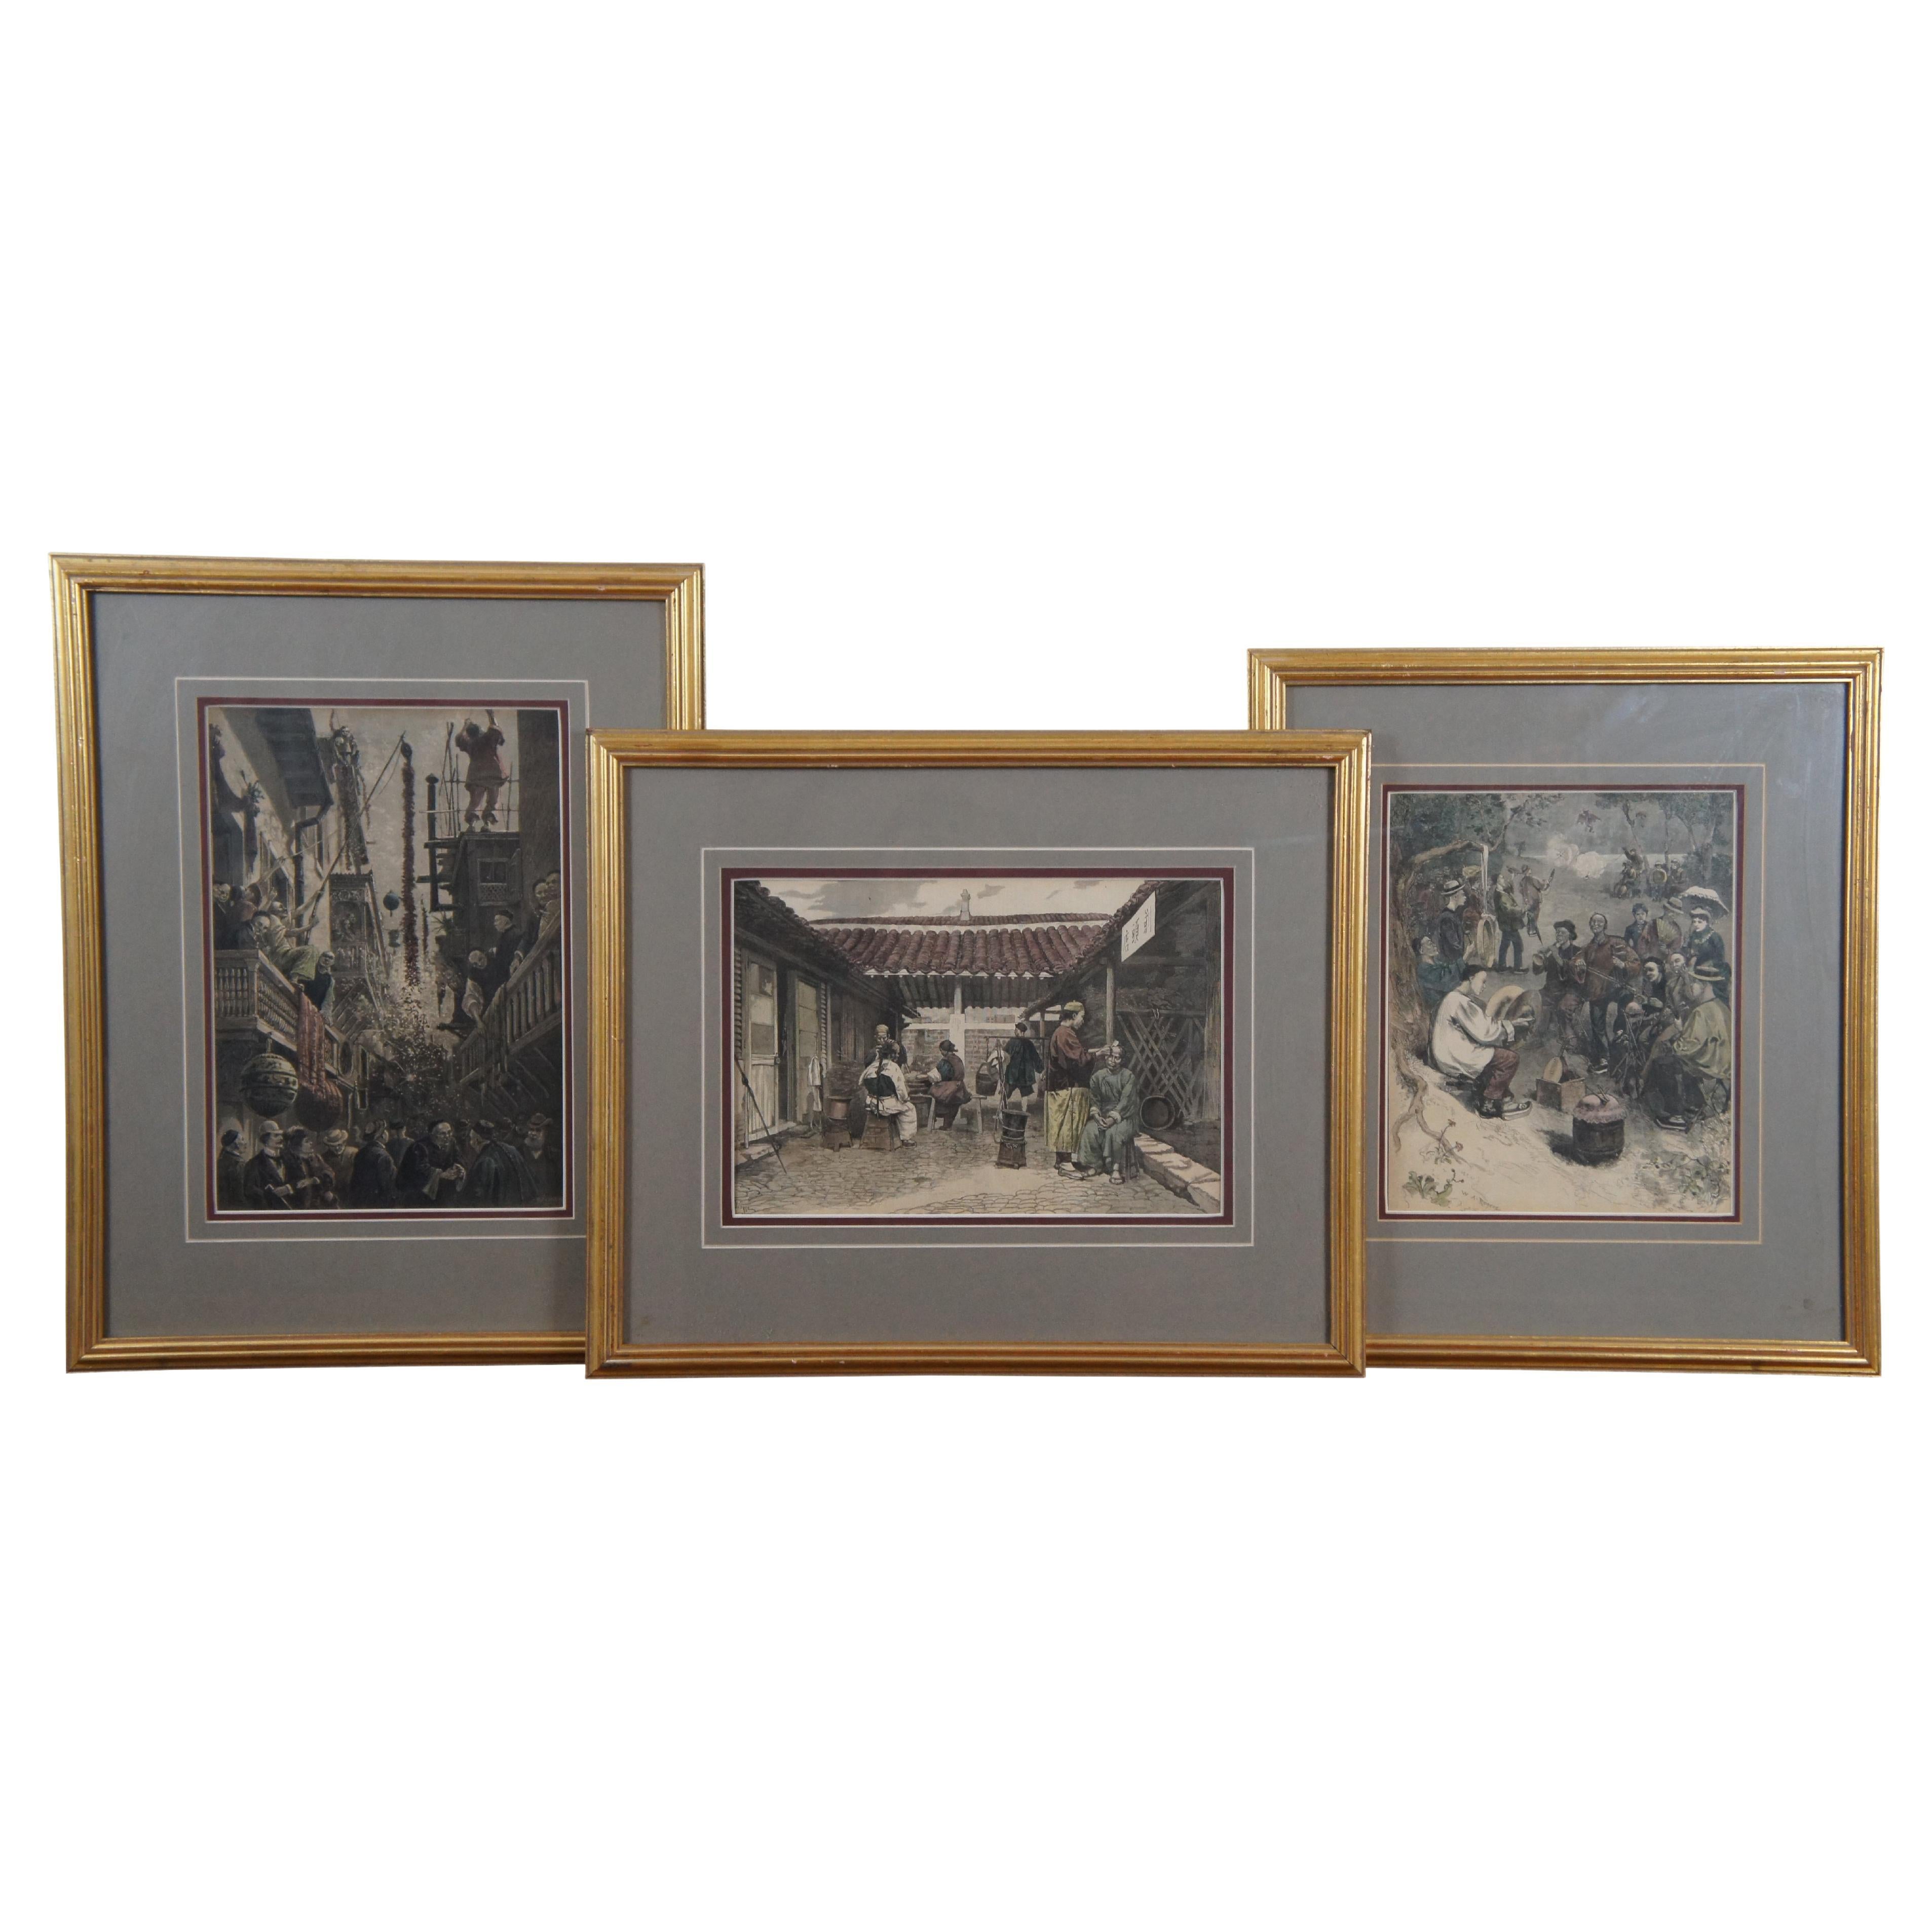 Set of 3 Framed 19th C. Hand Colored Engravings Chinese Culture Harpers Weekly